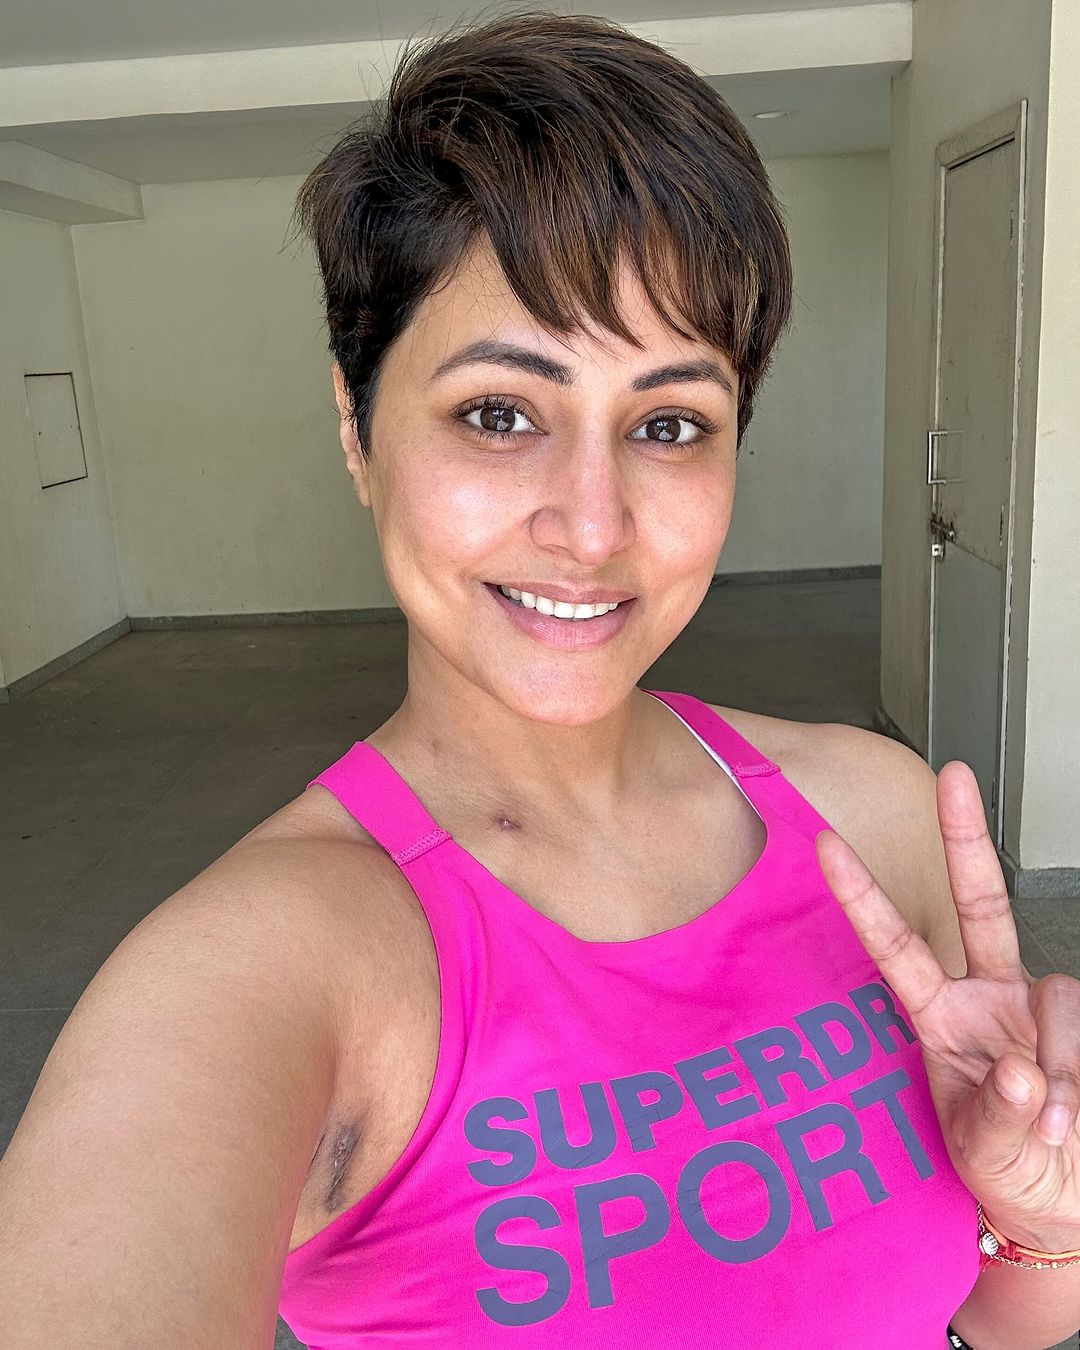 Warrior Hina Khan Flaunts Her Scars In Her New Post. She Received A Heartfelt Message. Check What It Is!